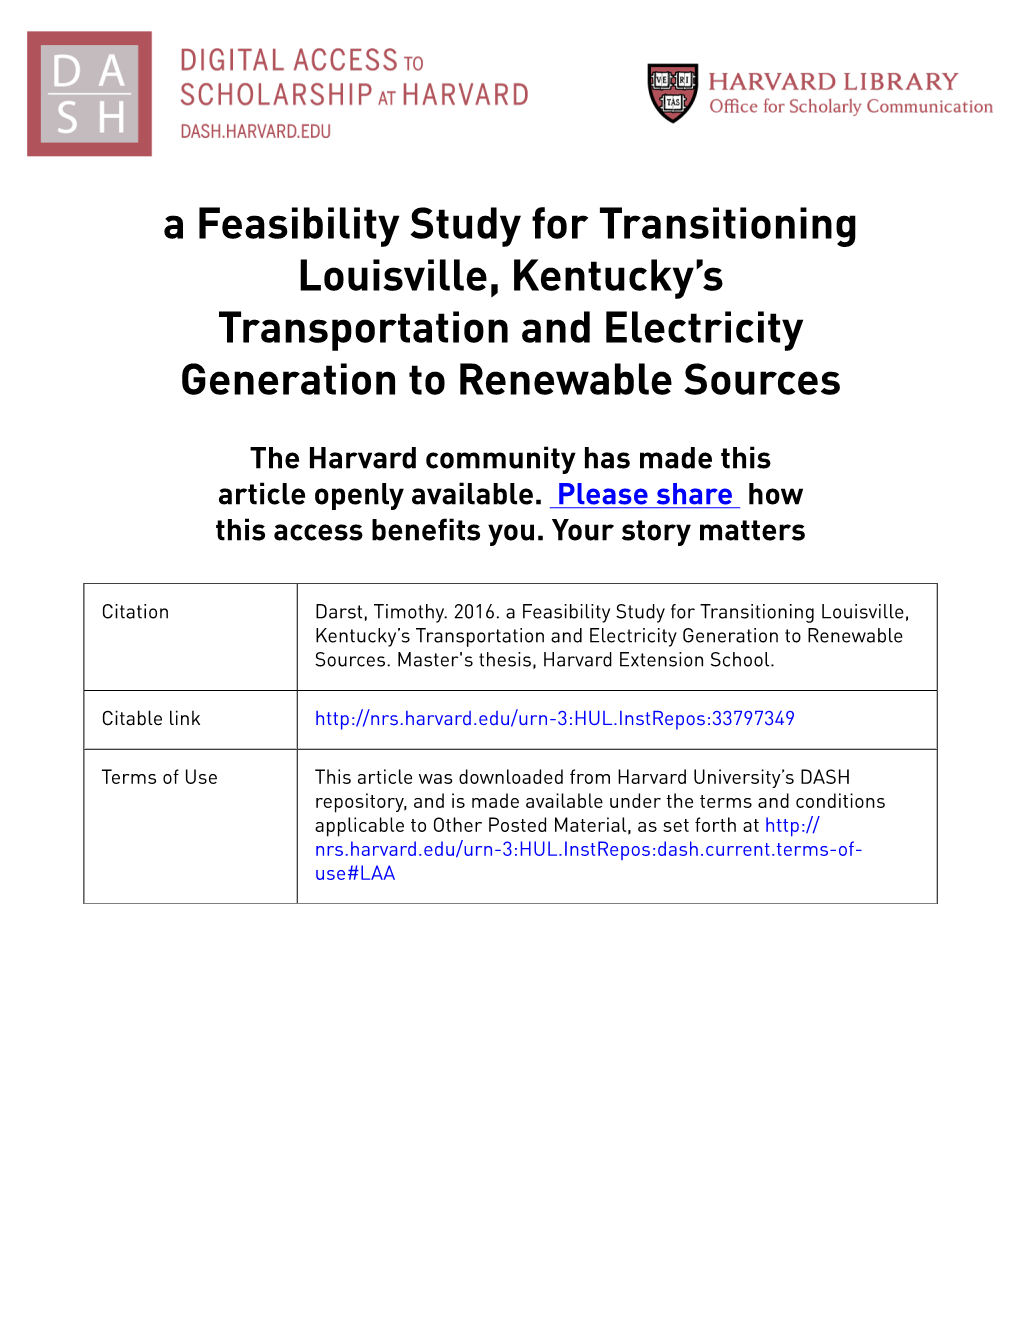 A Feasibility Study for Transitioning Louisville, Kentucky's